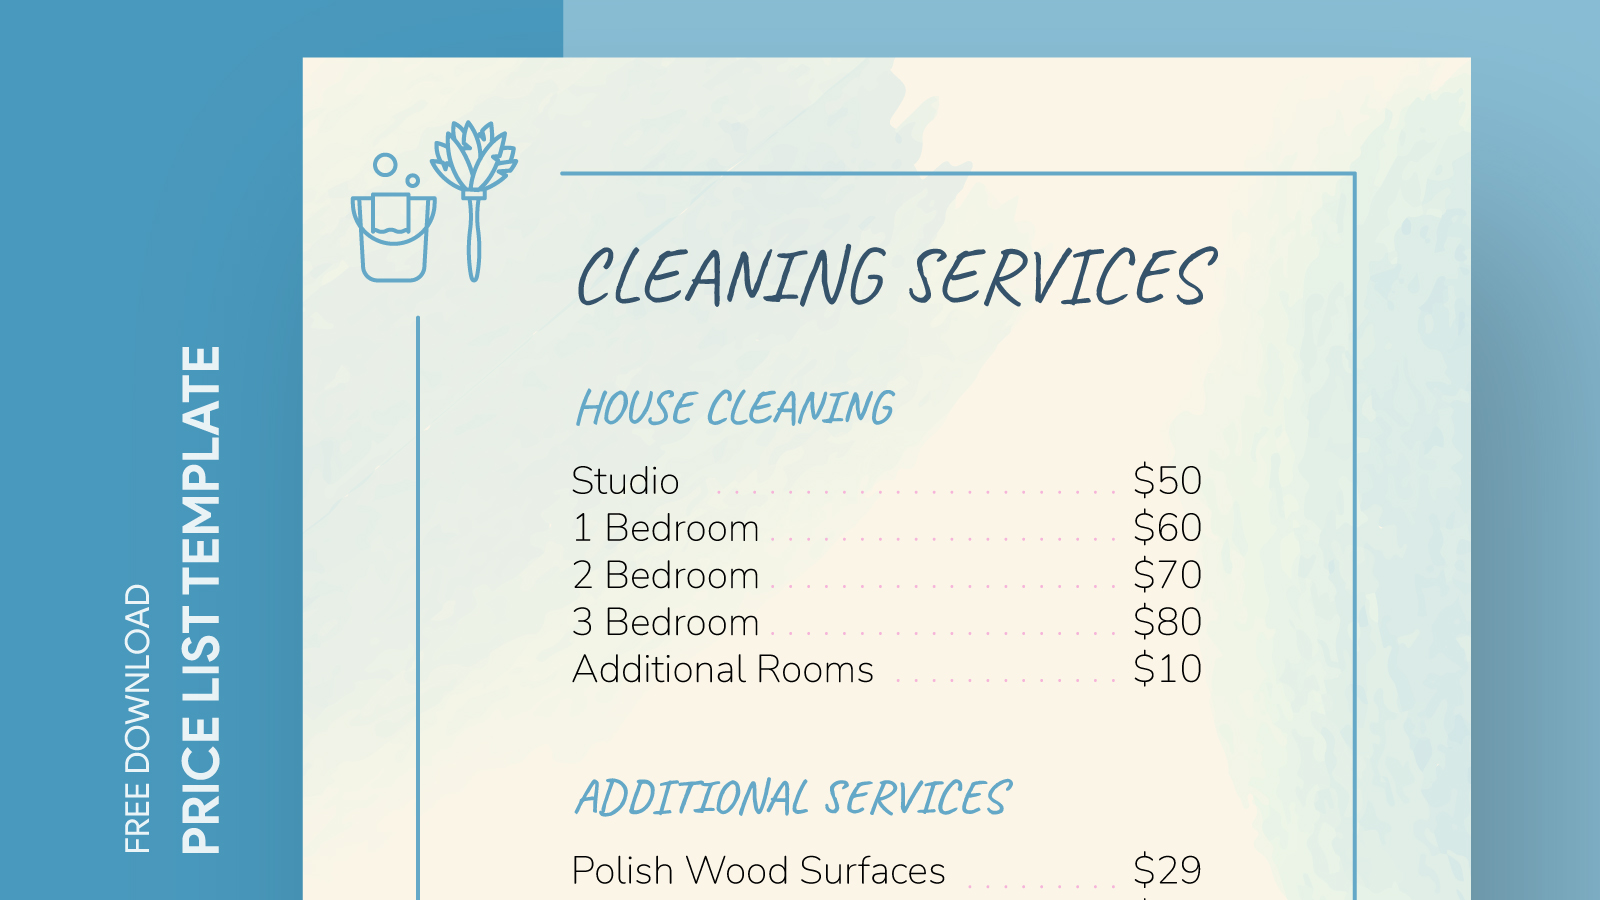 Commercial Cleaning Services Price List Free Google Docs Template Free Cleaning Services Price